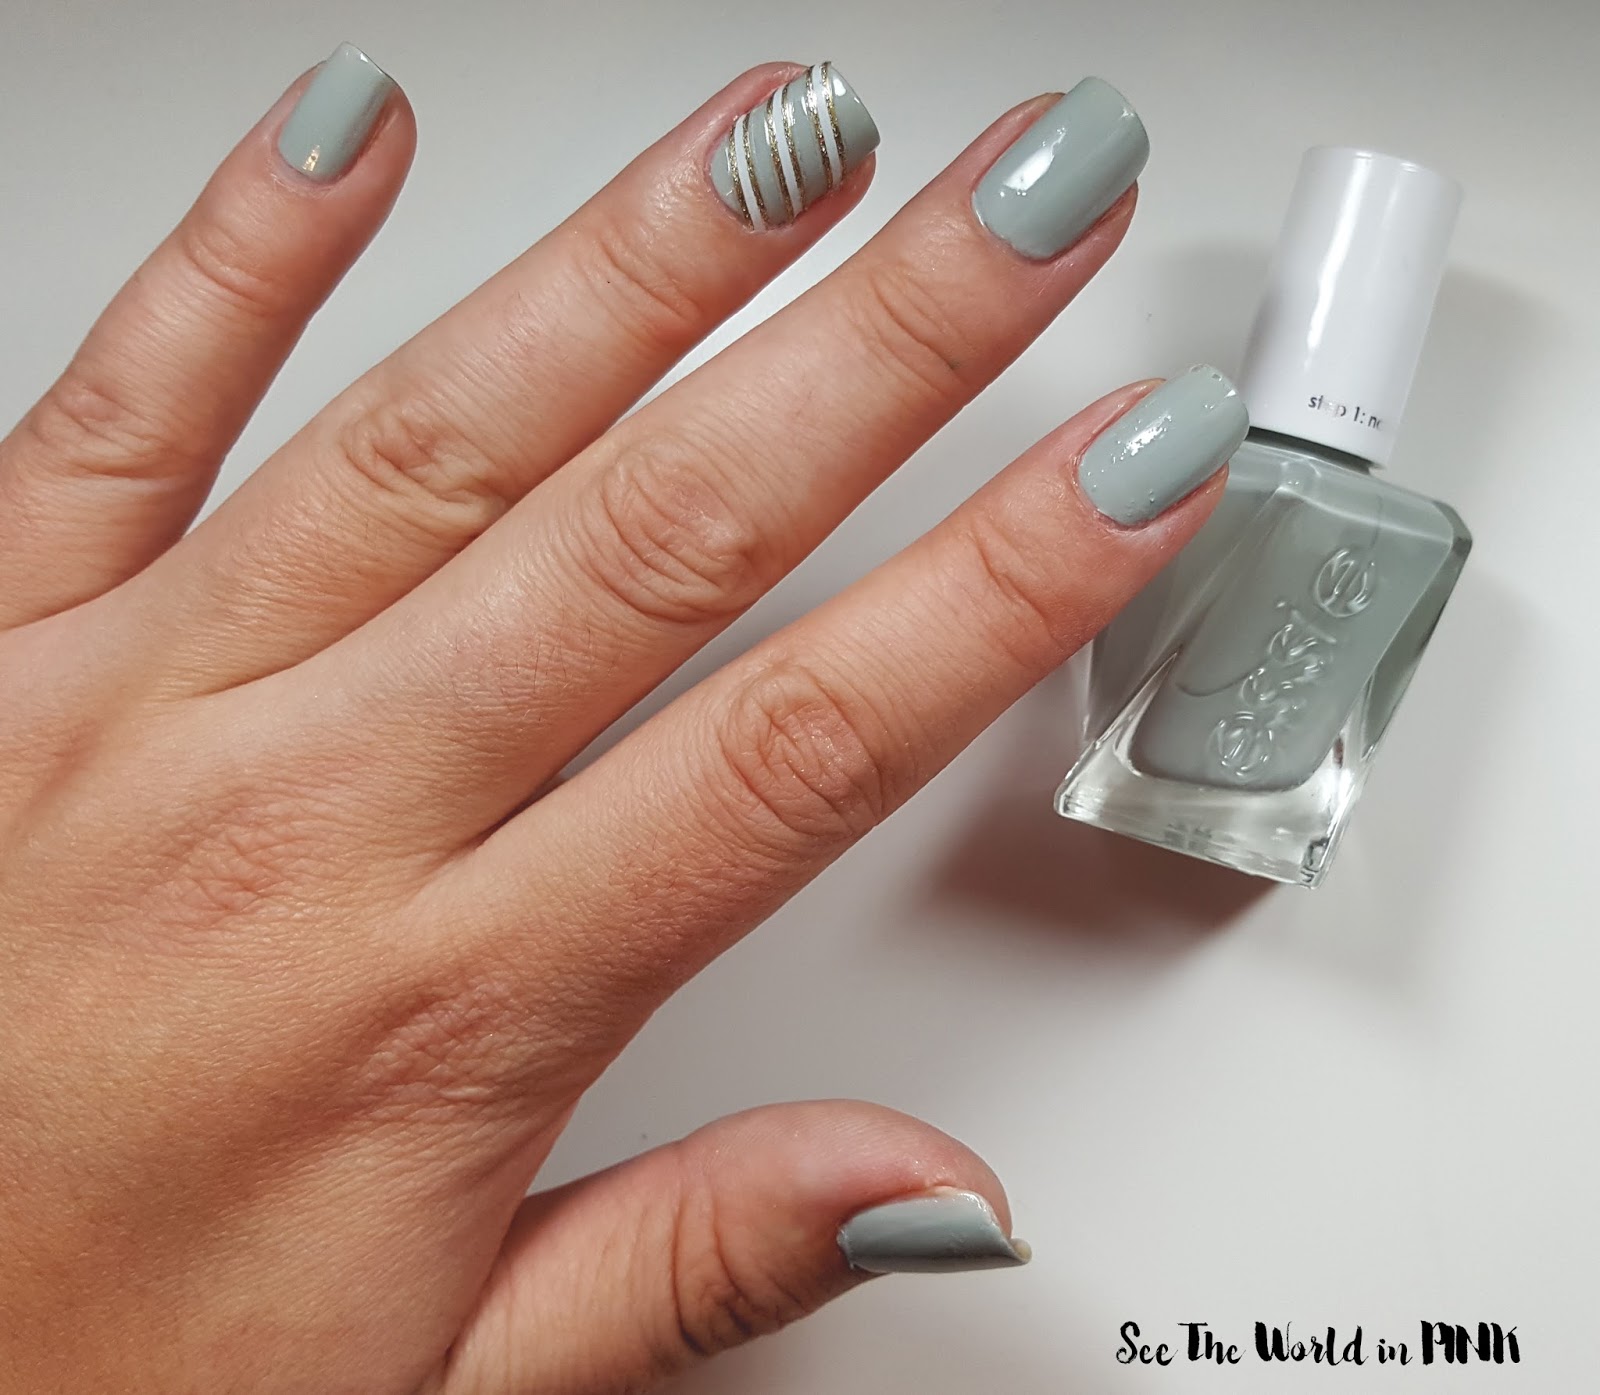 Manicure Tuesday - Essie Gel Couture Polish in "Sage You Love Me"